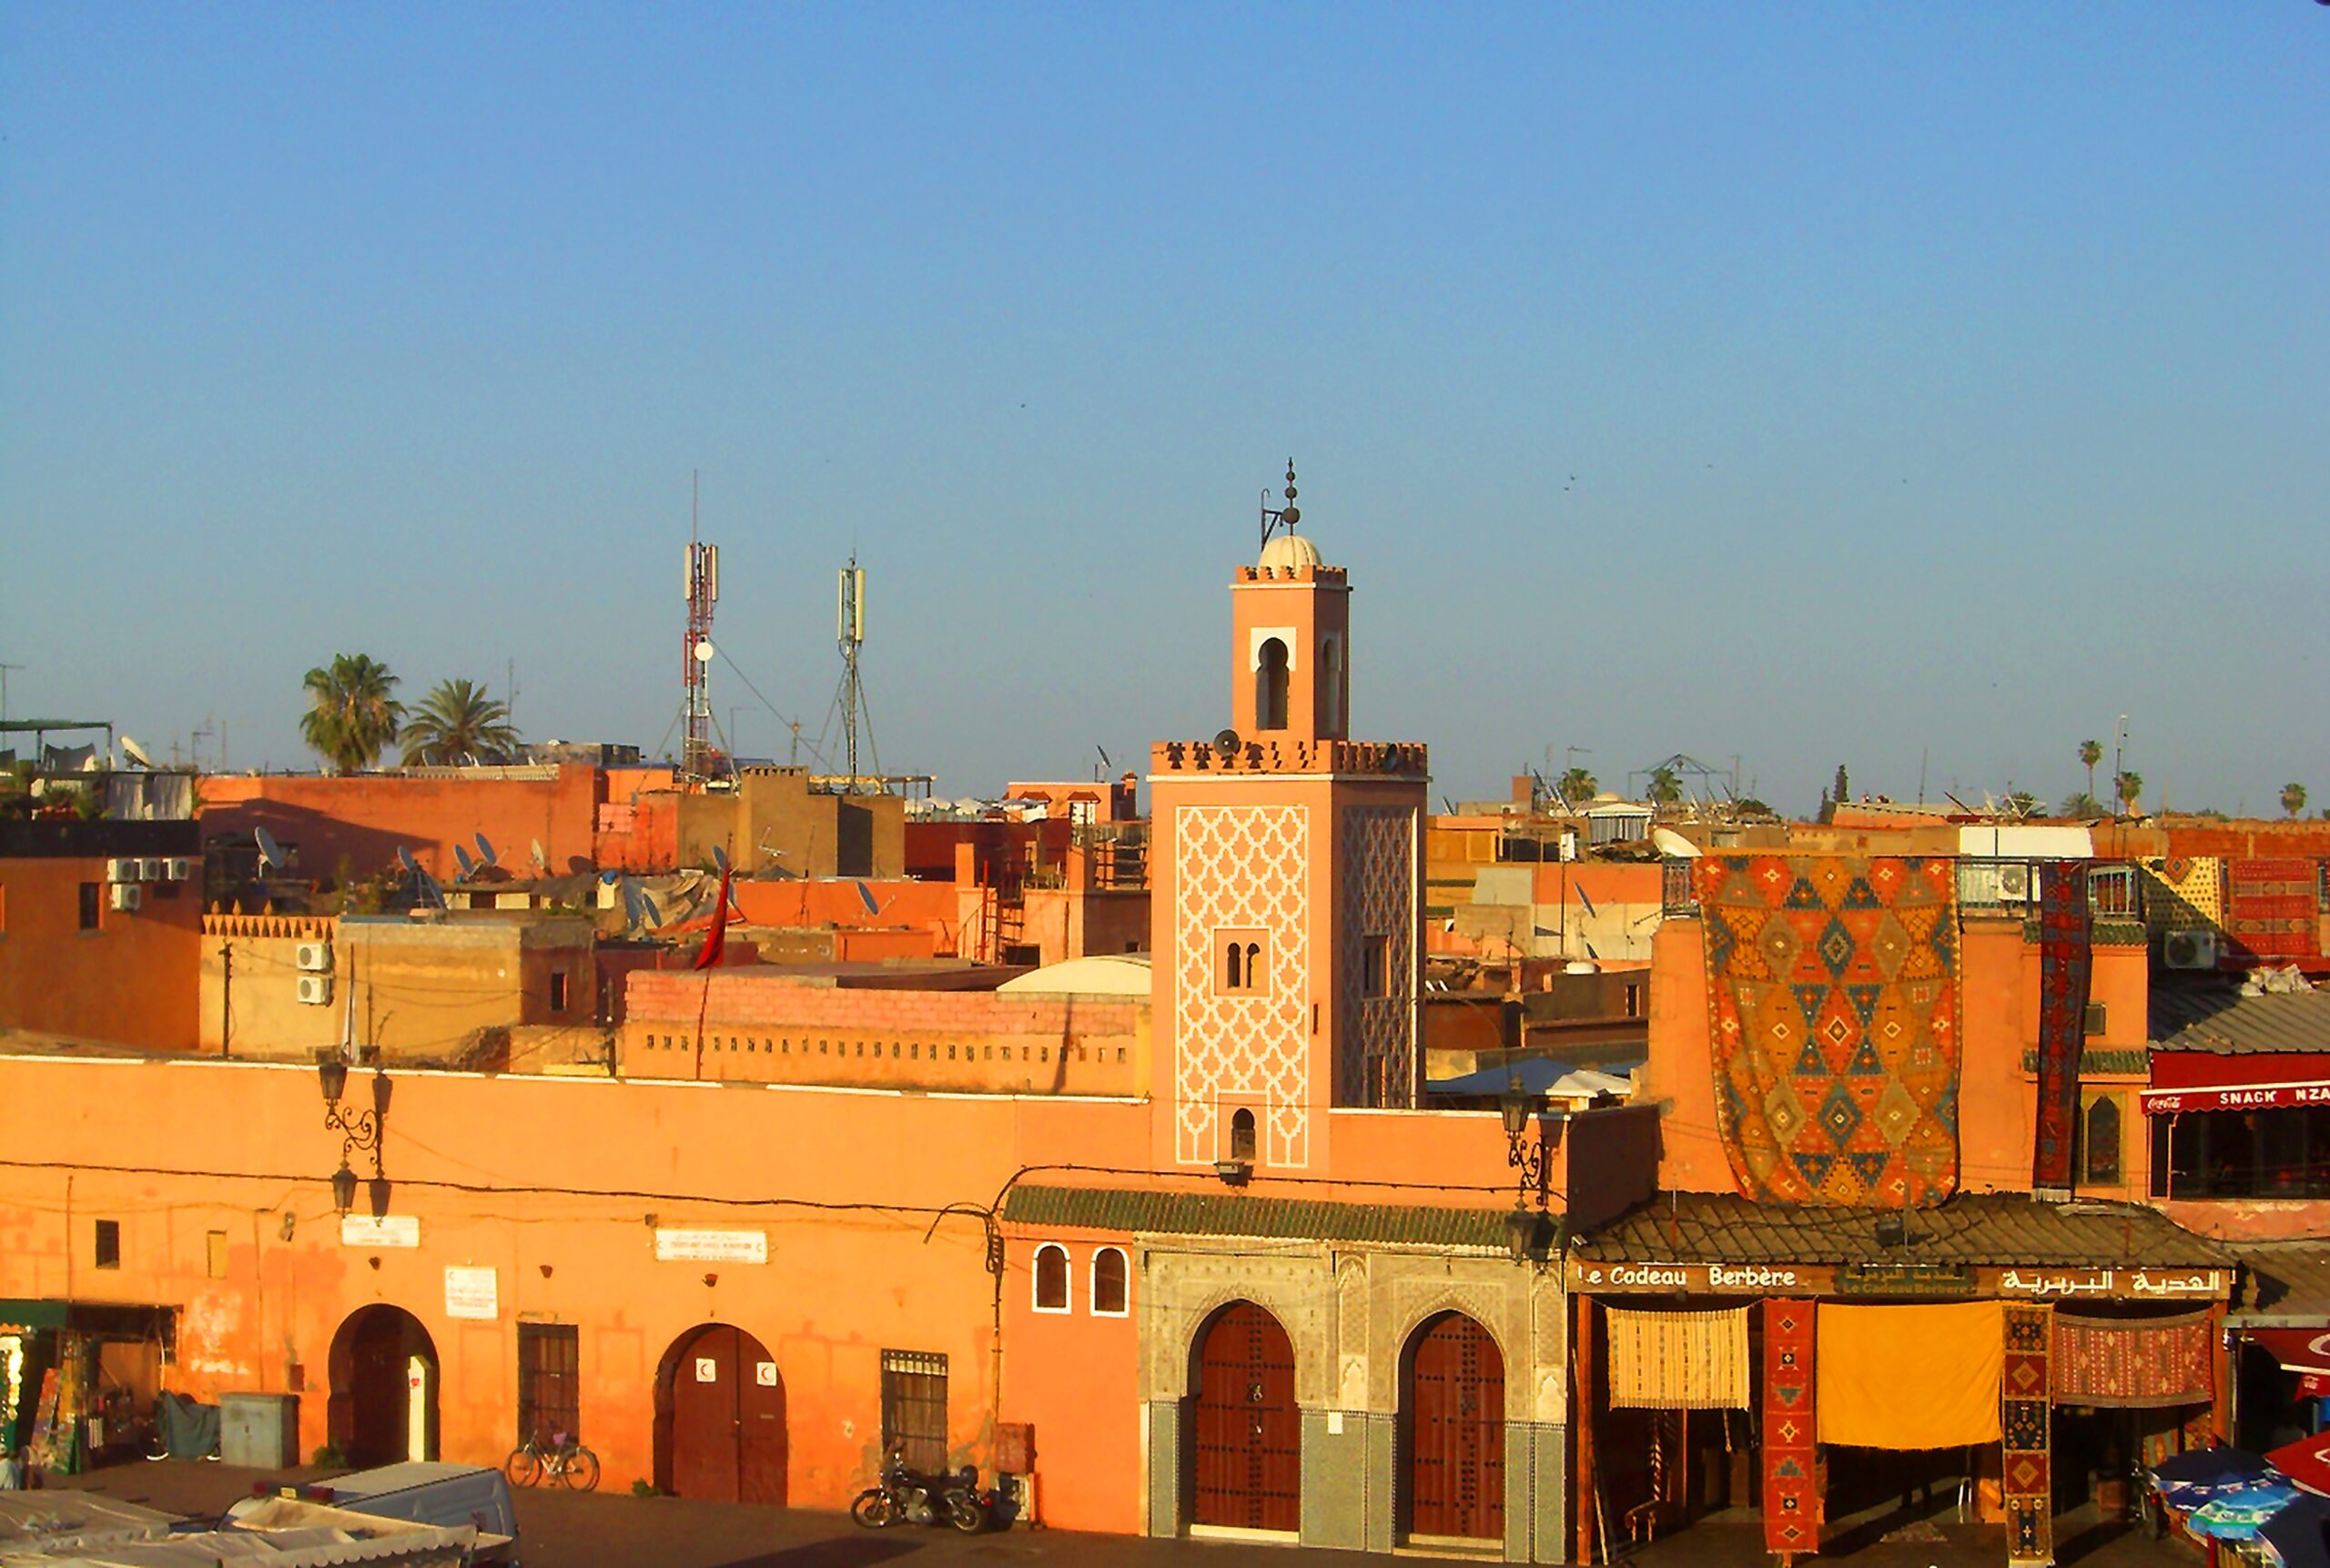 8 days in Morocco